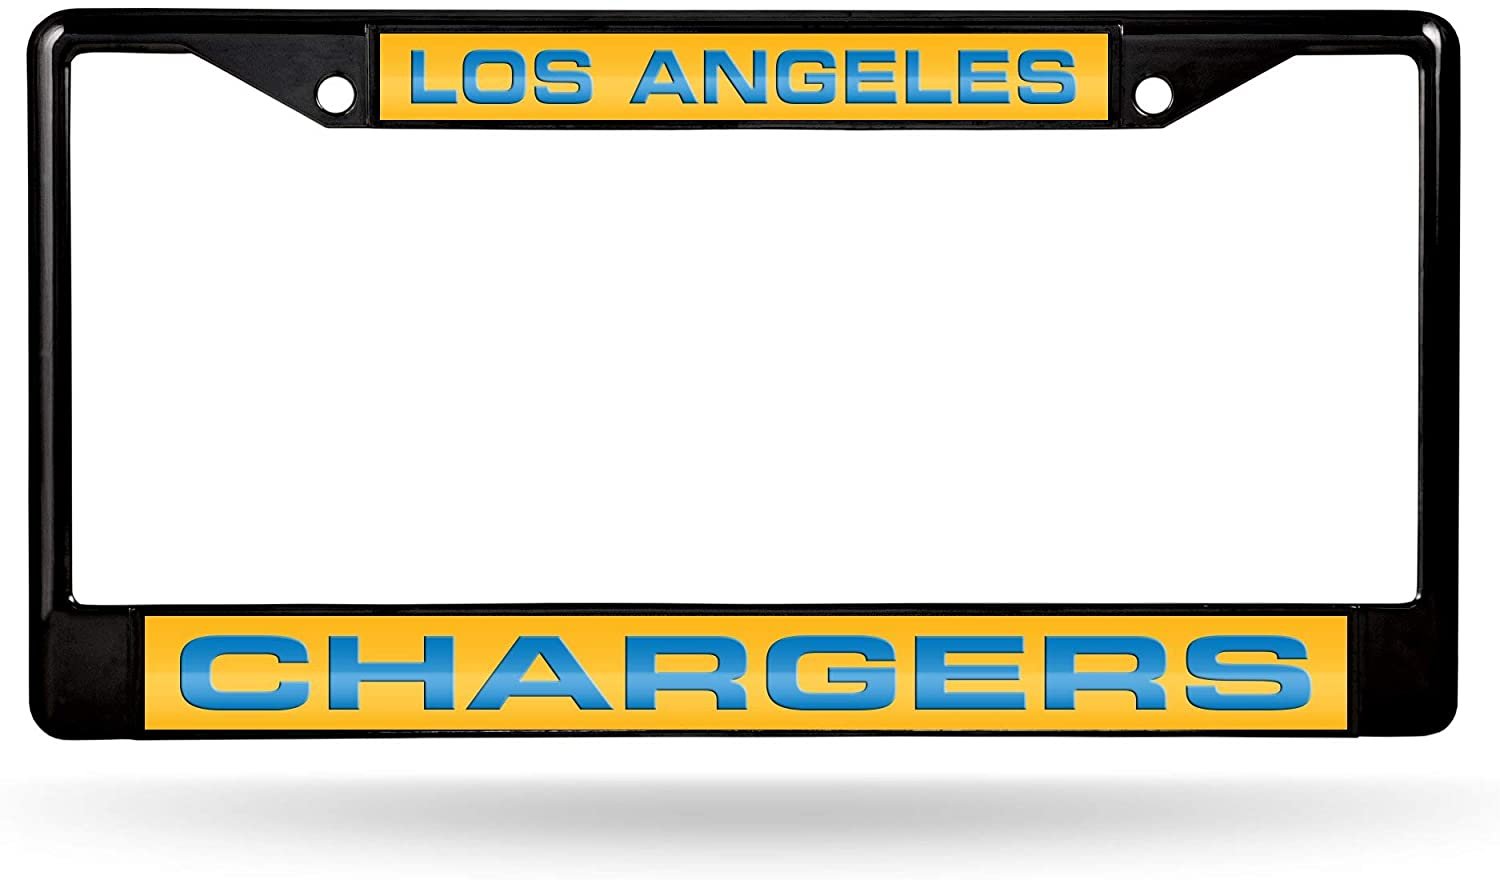 Los Angeles Chargers Black Metal License Plate Frame Tag Cover, Laser Acrylic Mirrored Inserts, 12x6 Inch